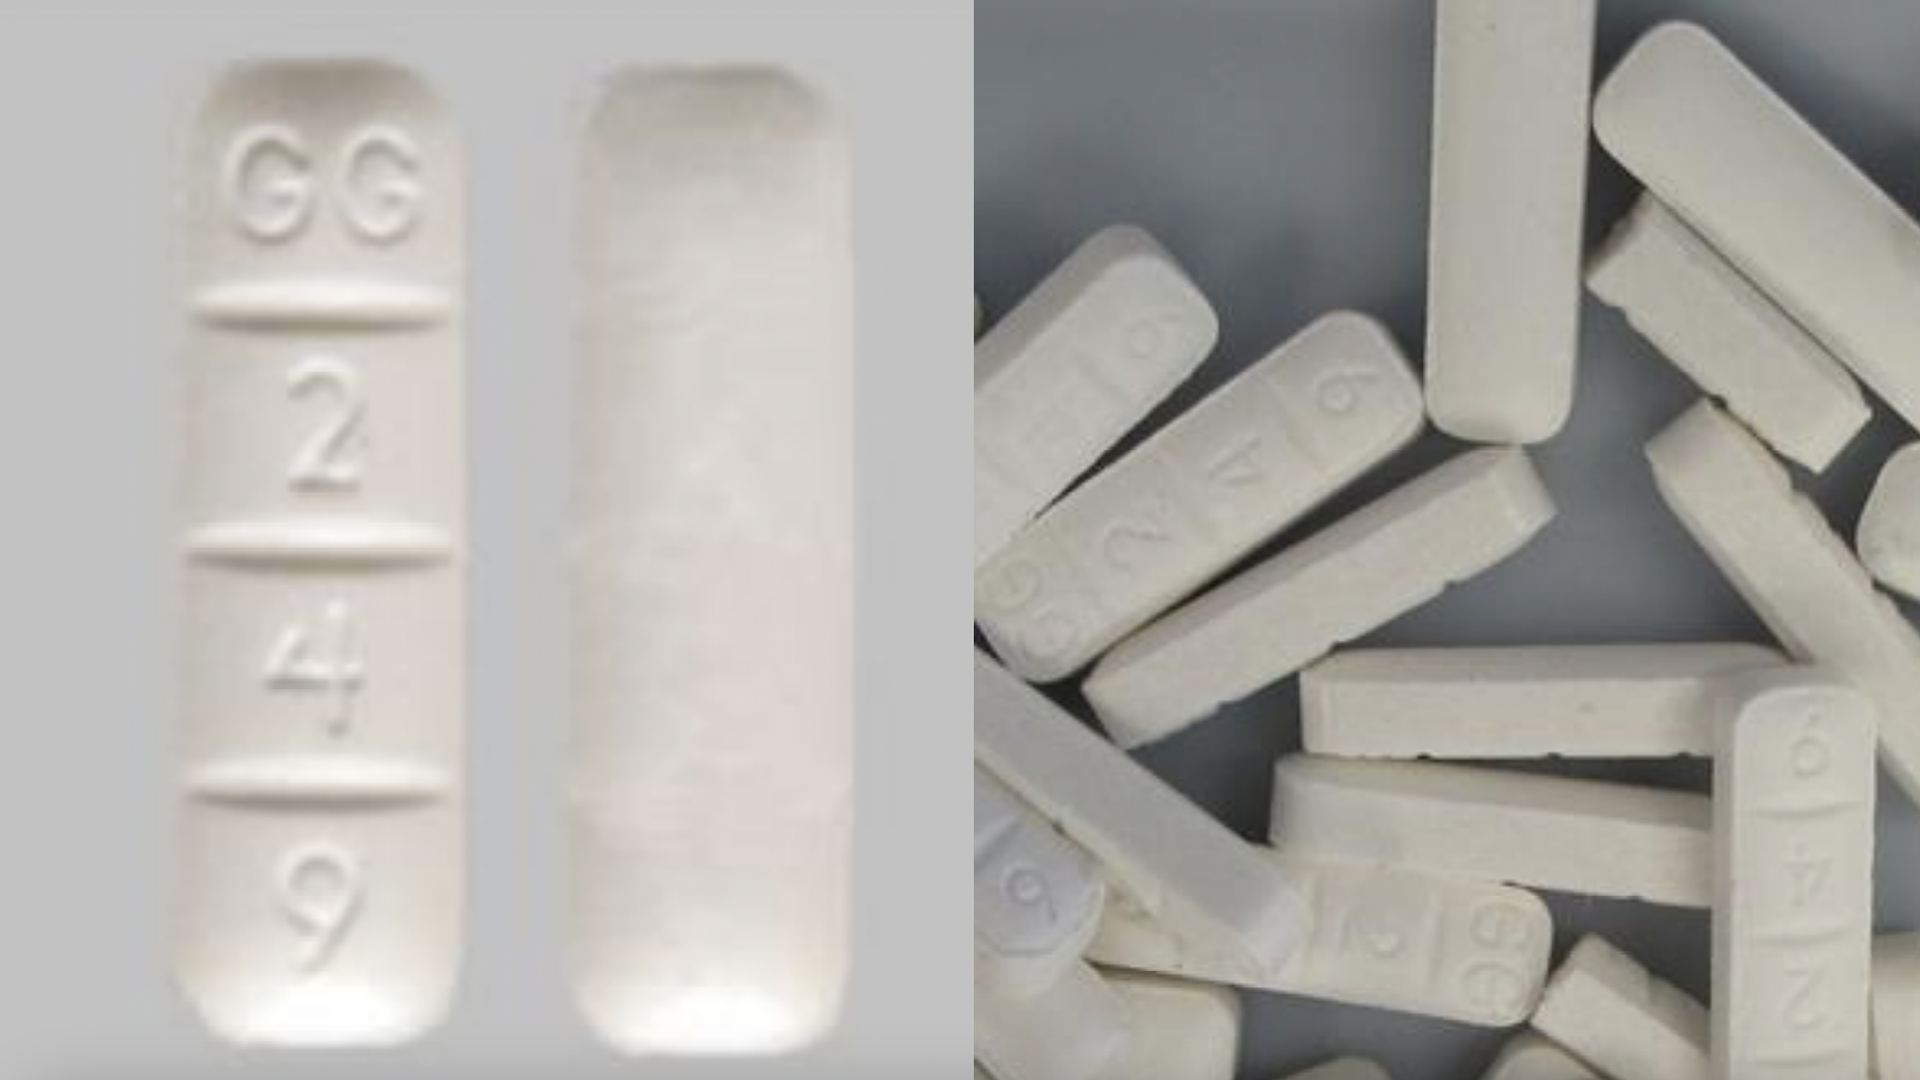 Prescription pills shown side by side with virtually identical counterfeit lookalikes.